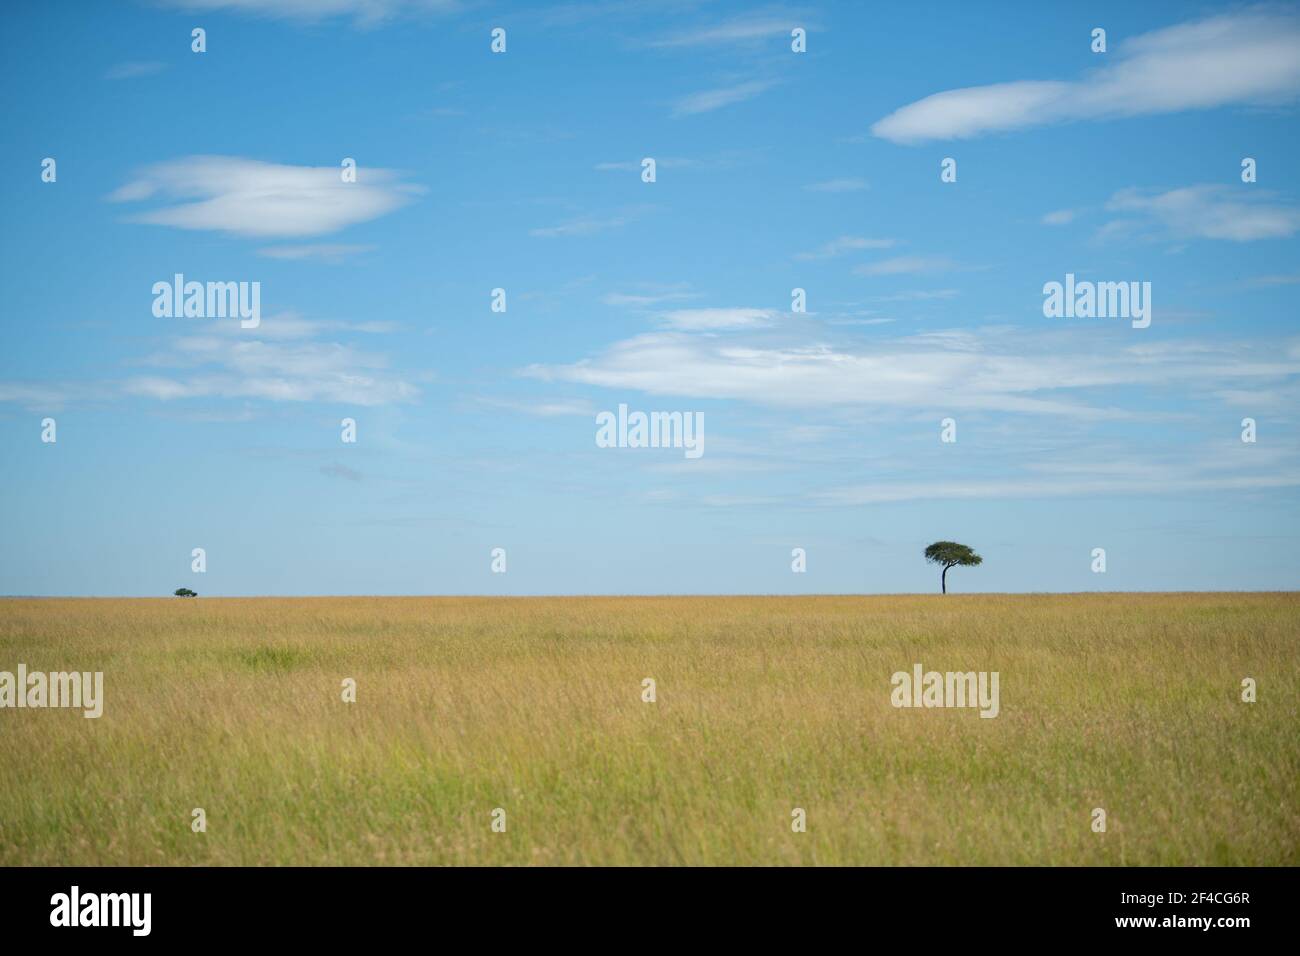 one tree in a distance in african savanna in Kenya at masai mara national park on a bright day with blue sky and less clouds Stock Photo